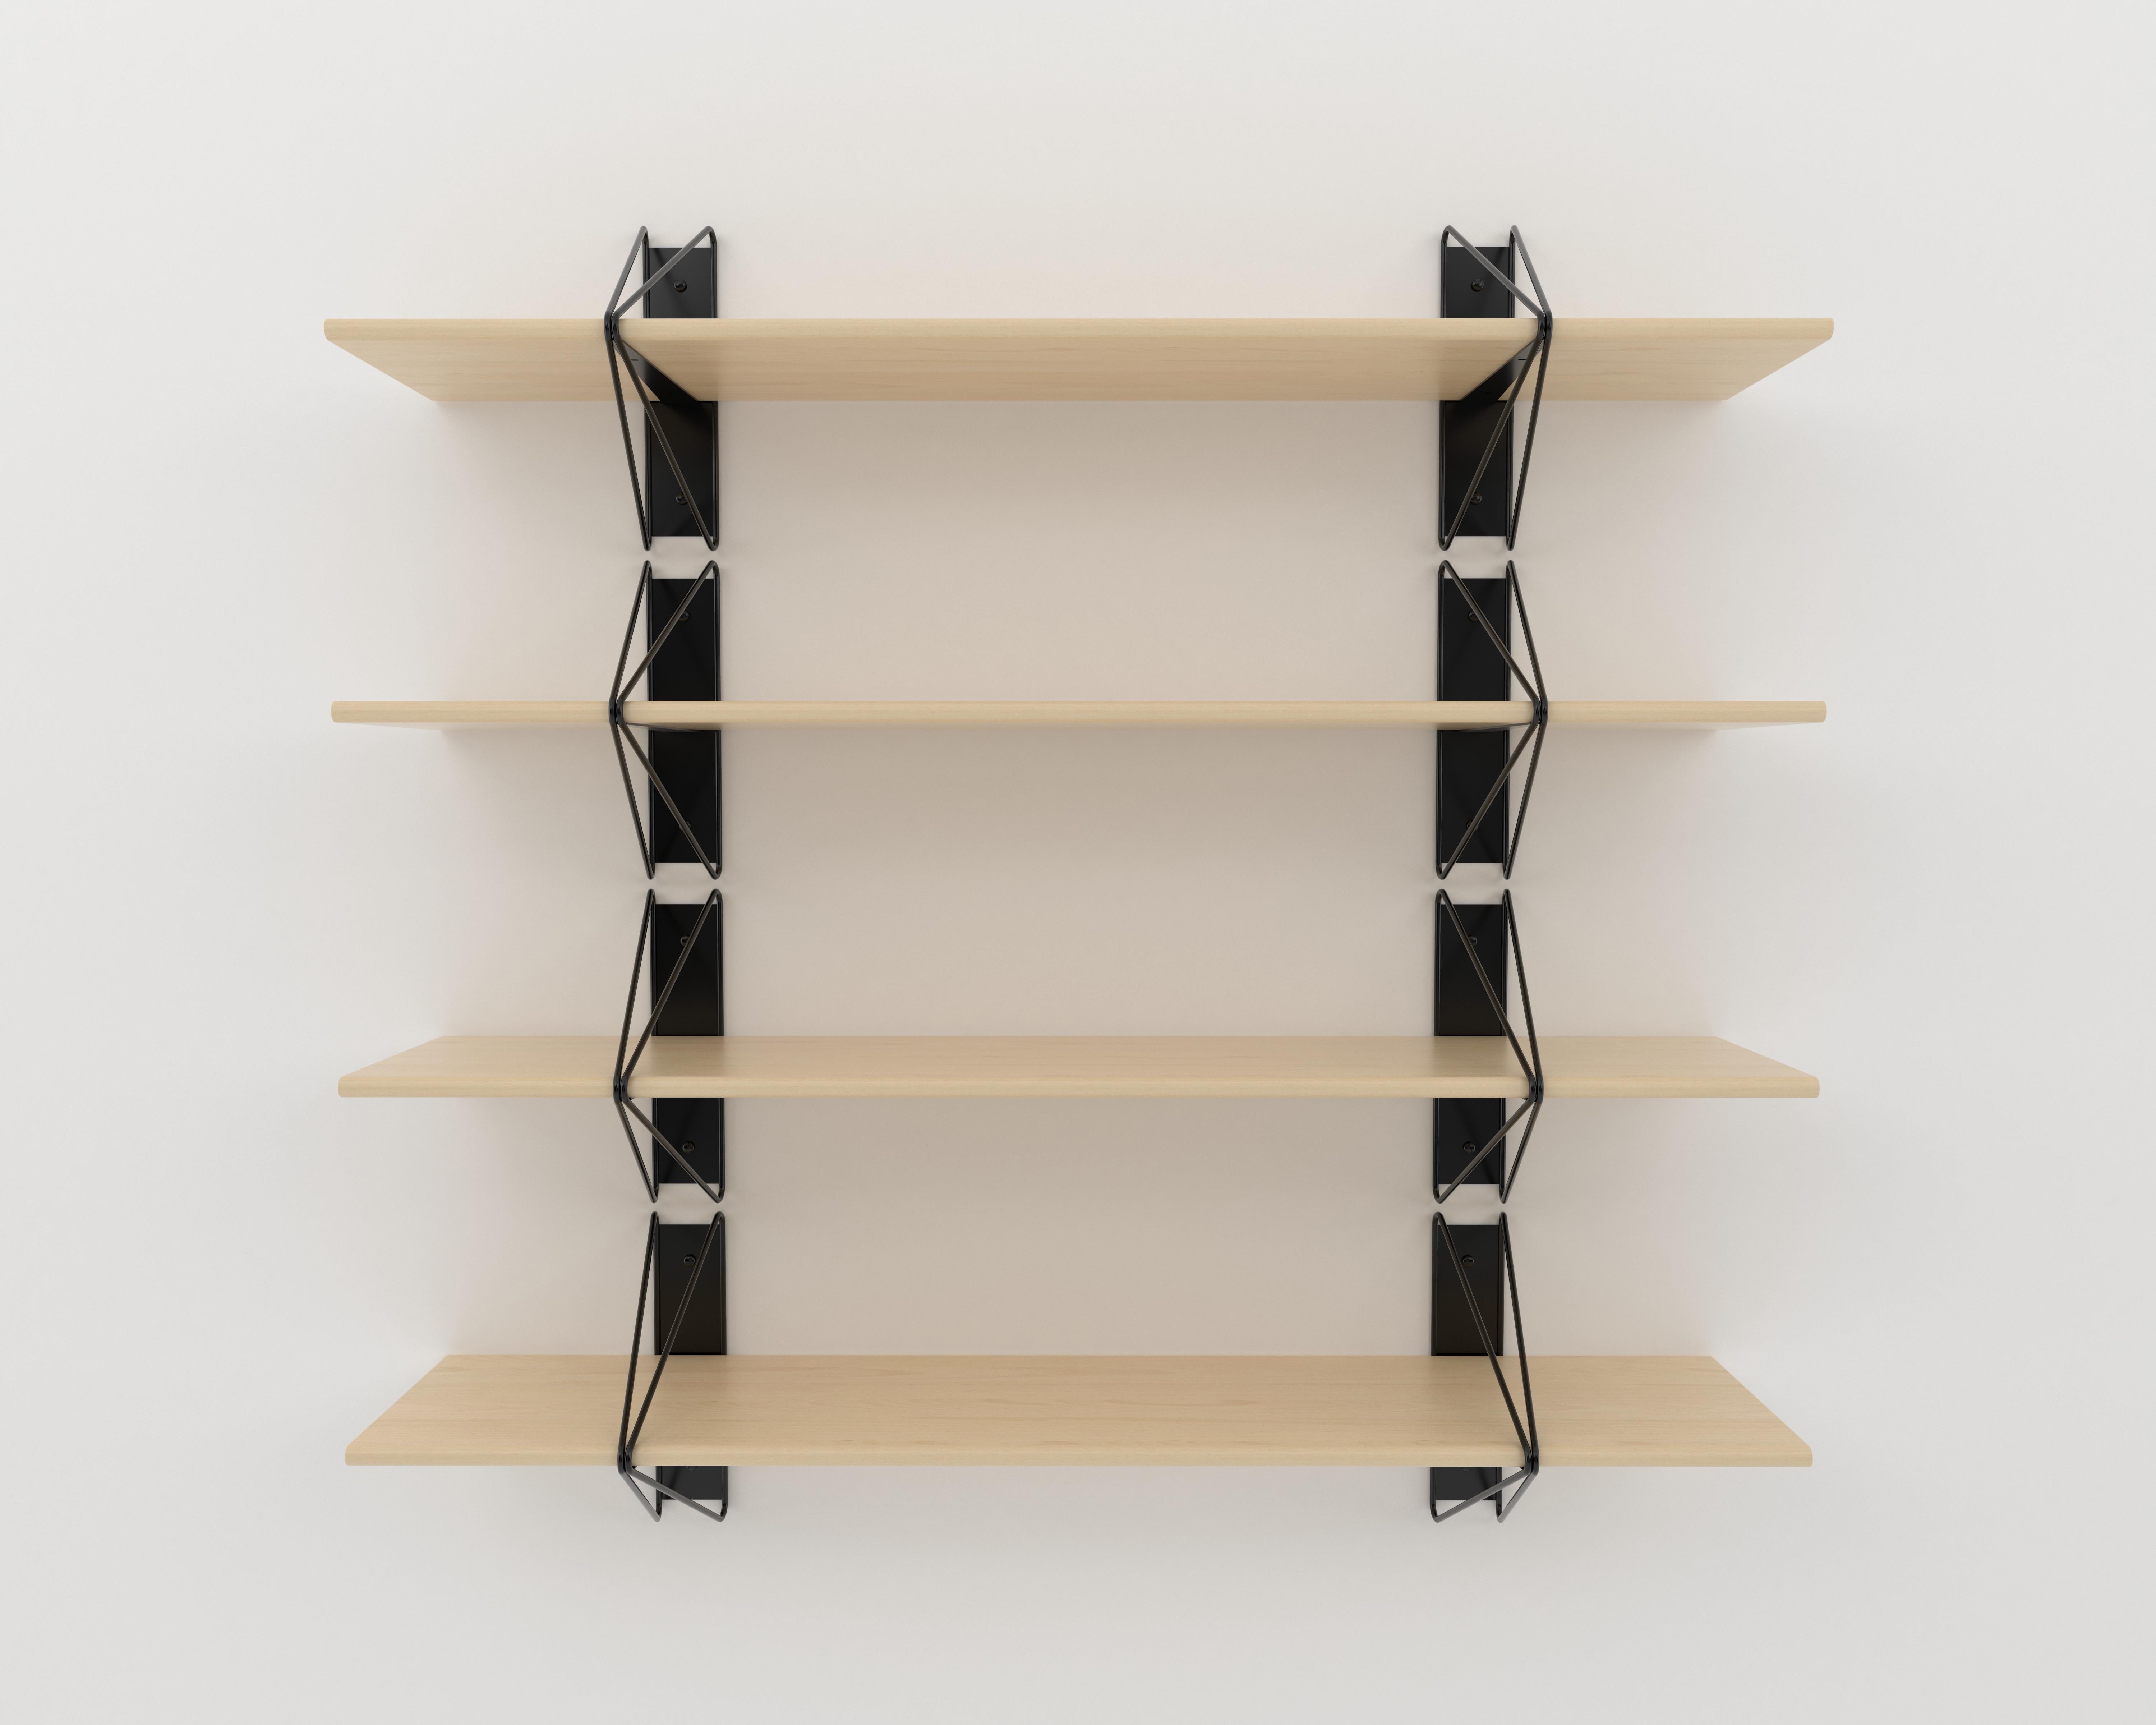 Oiled Set of 2 Strut Shelves from Souda, White and Maple, Made to Order For Sale